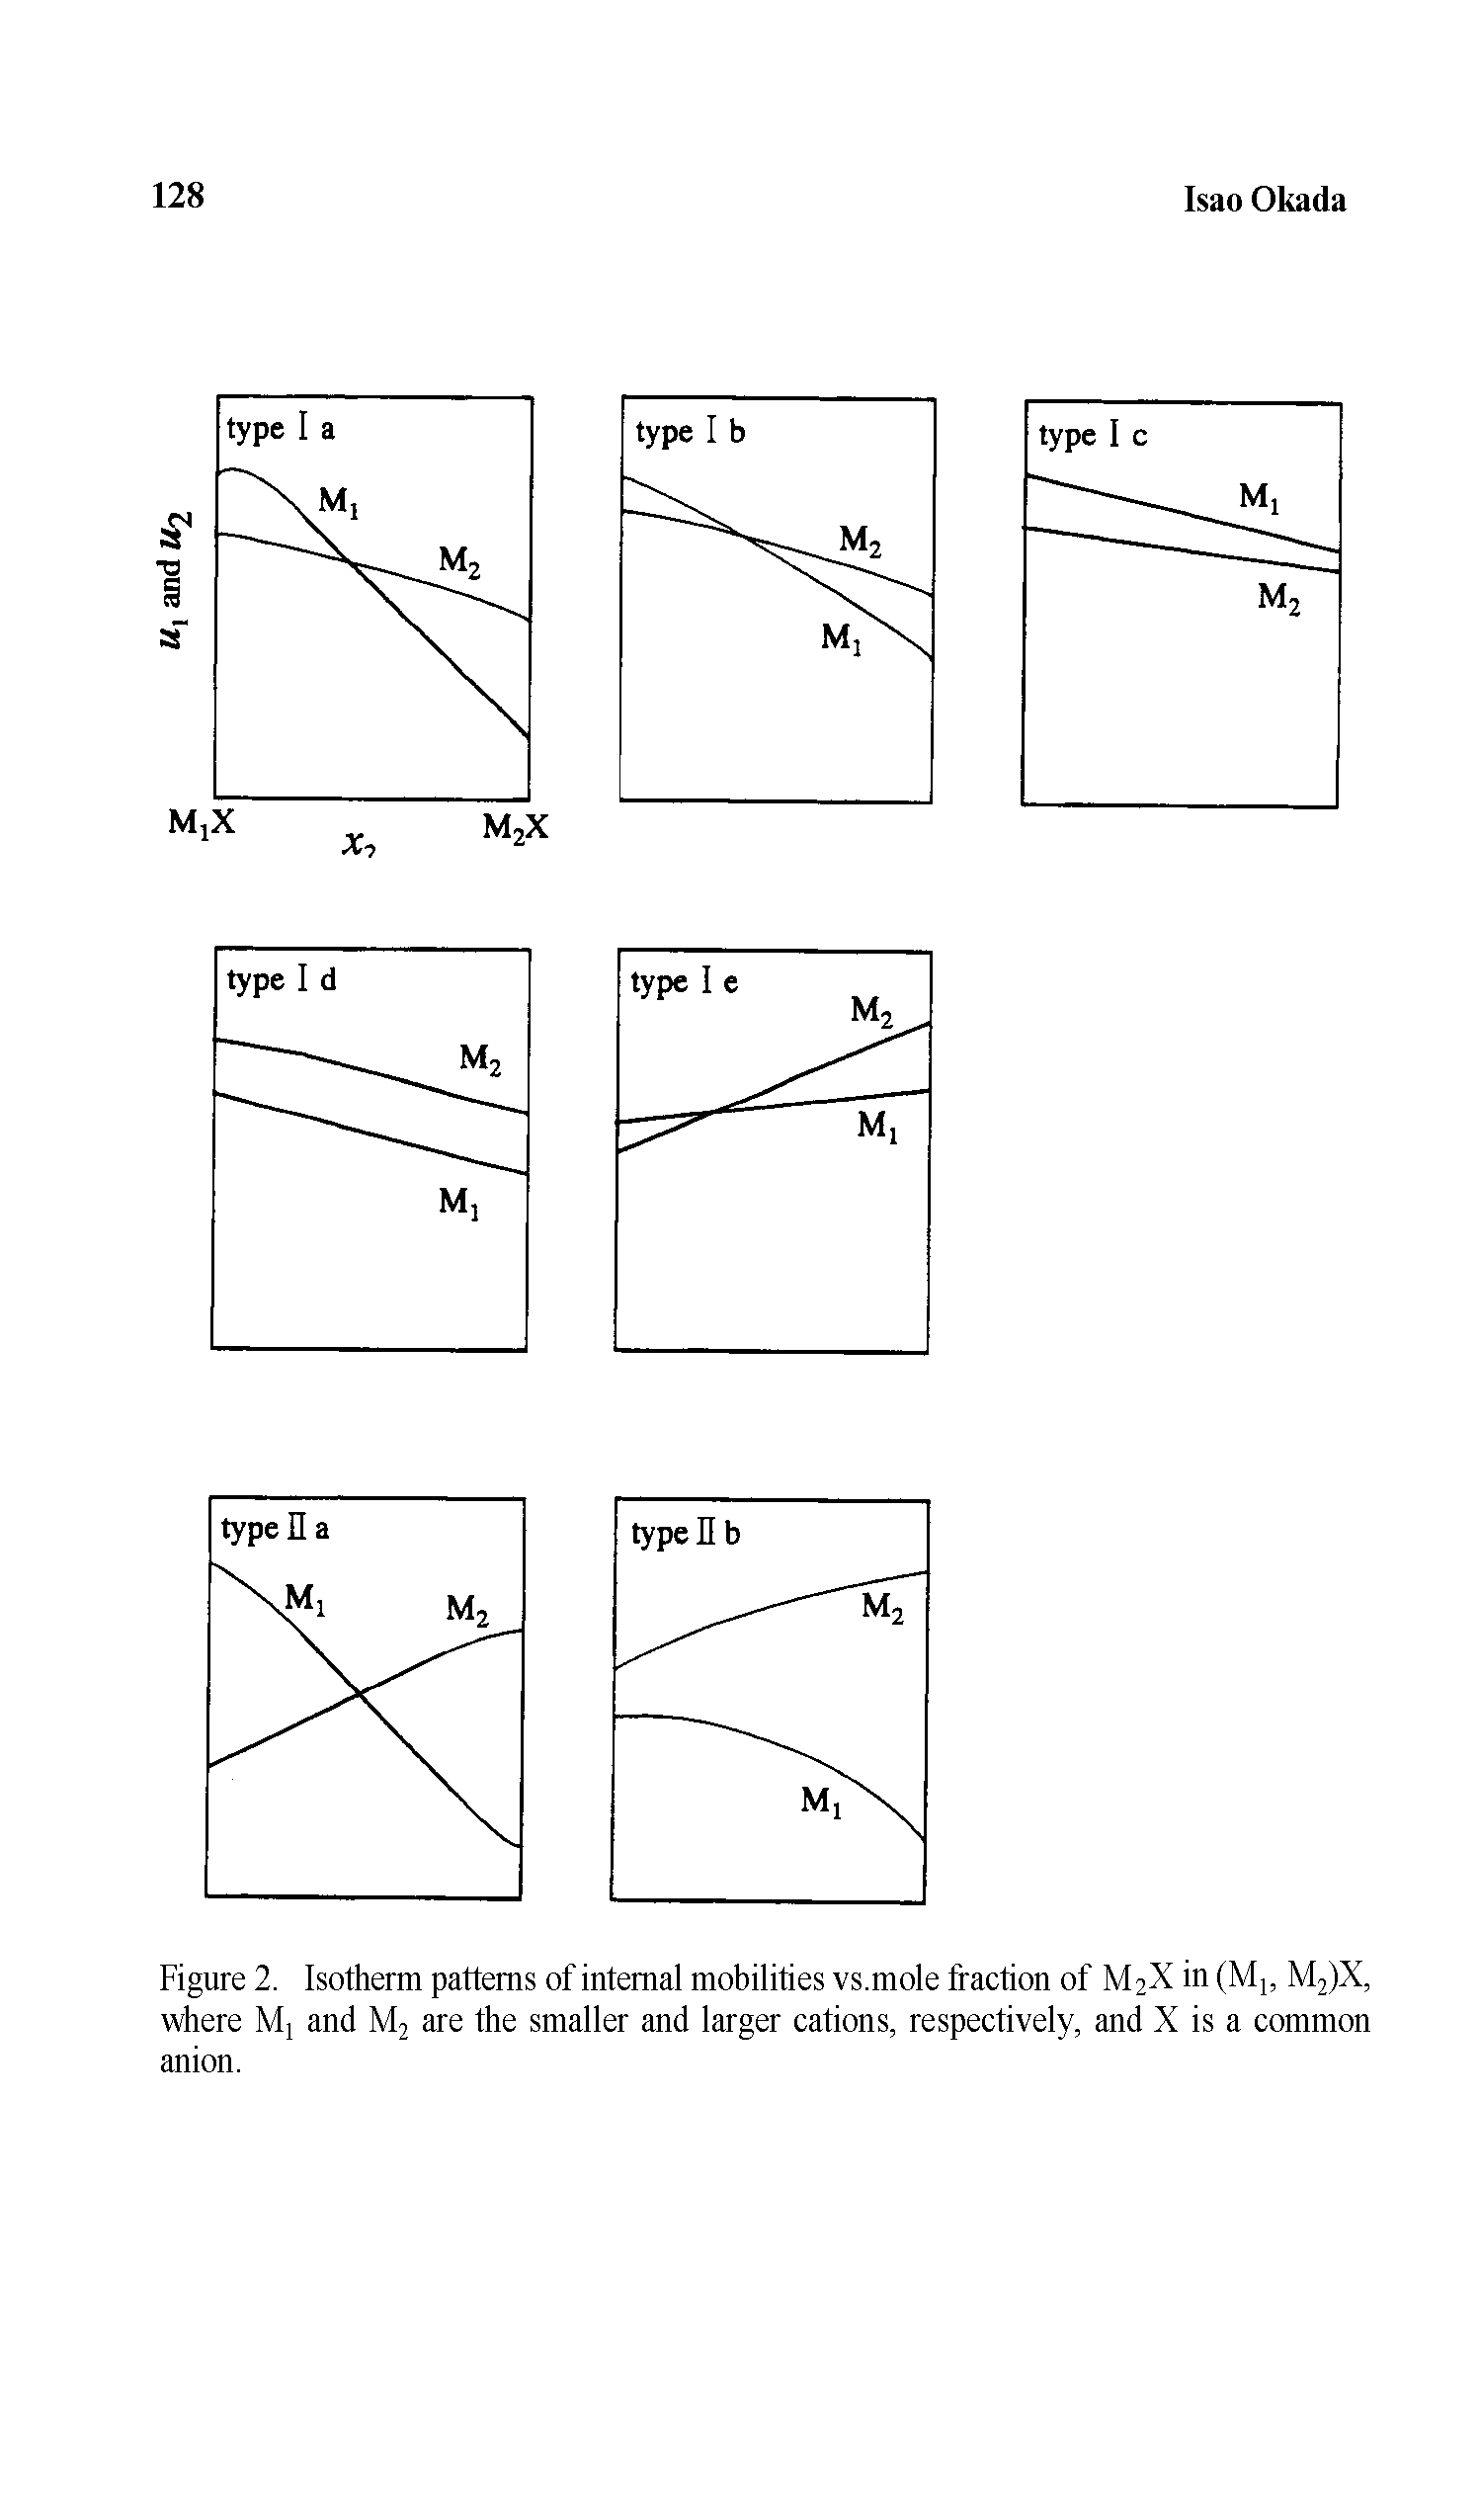 Figure 2. Isotherm patterns of internal mobilities vs.mole fraction of M2X in (Mj, M2)X, where Mj and Mj are the smaller and larger cations, respectively, and X is a common anion.